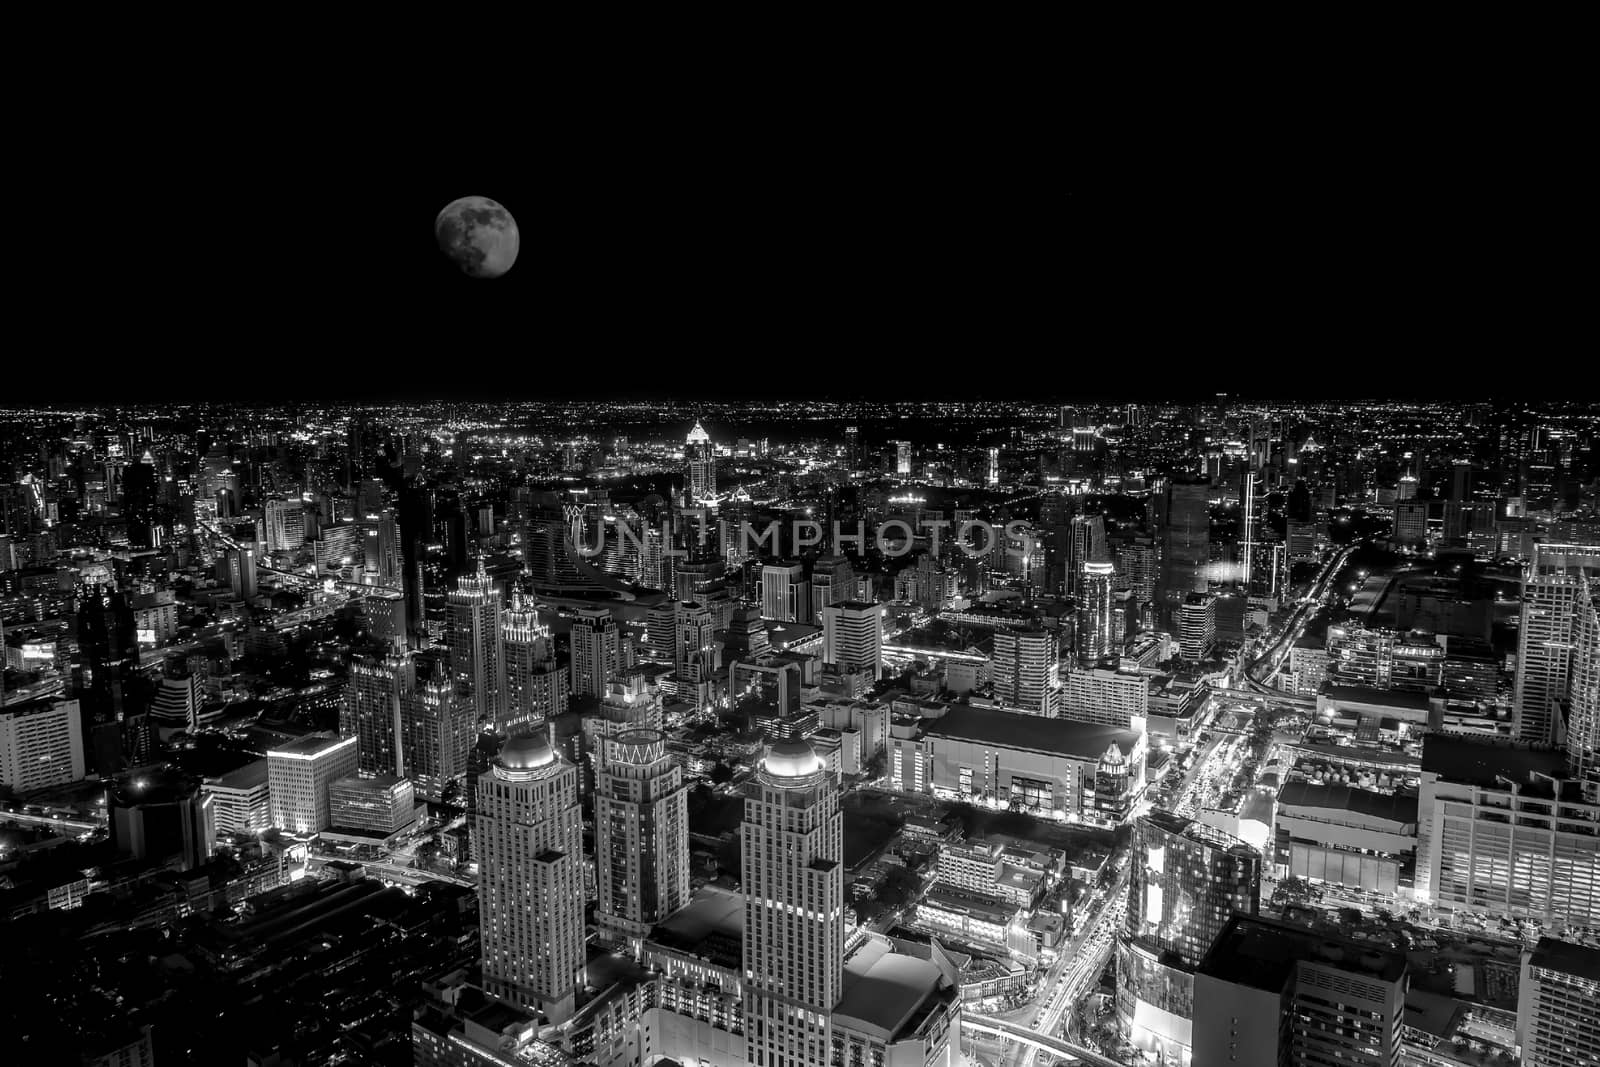 Top view of the colorful nightlife of Bangkok on the night of the full moon;black and white filter tone.